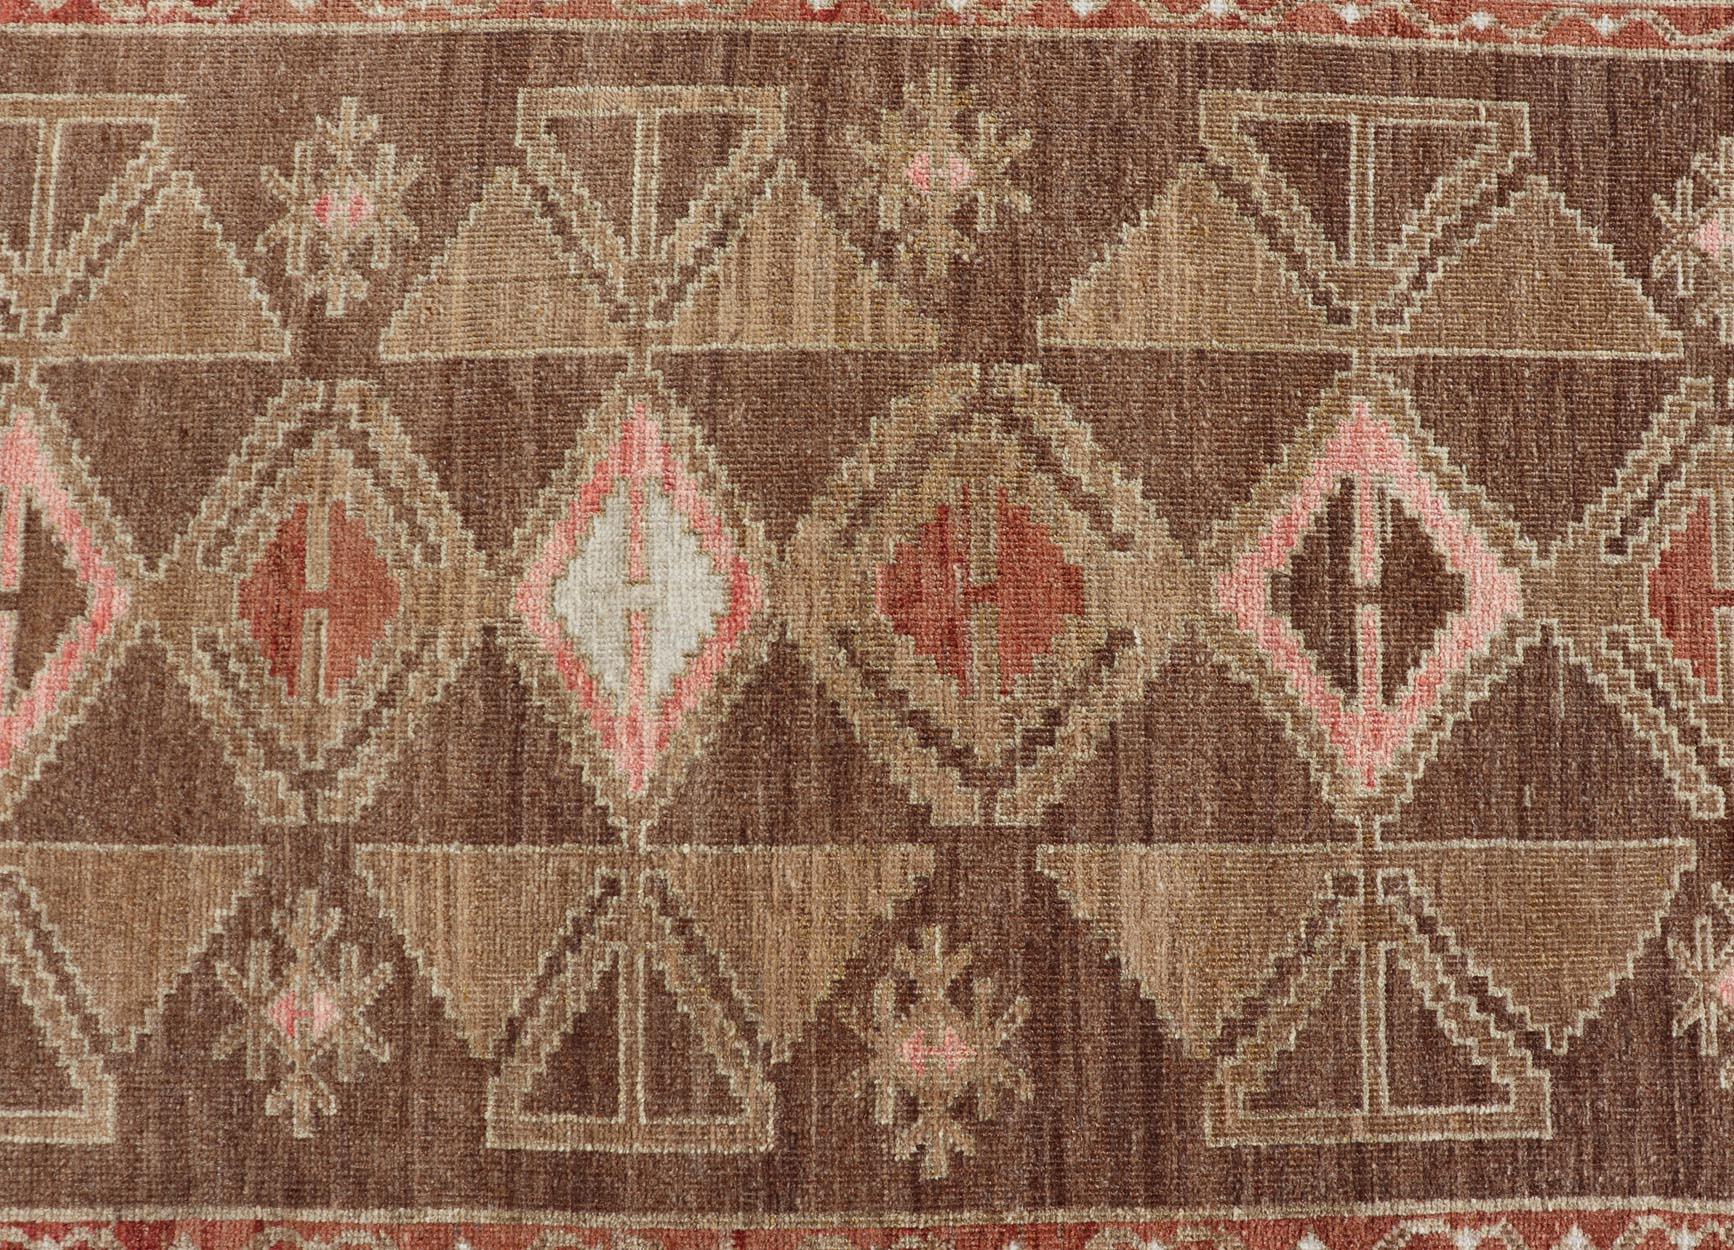 Vintage Turkish in brown background and taupe border with accent colors, red, pink, tan, green, taupe. Keivan Woven Arts / rug /TU-MTU-4880, country of origin / type: Turkey / Oushak, circa 1940

Measures: 4'4 x 9'9.